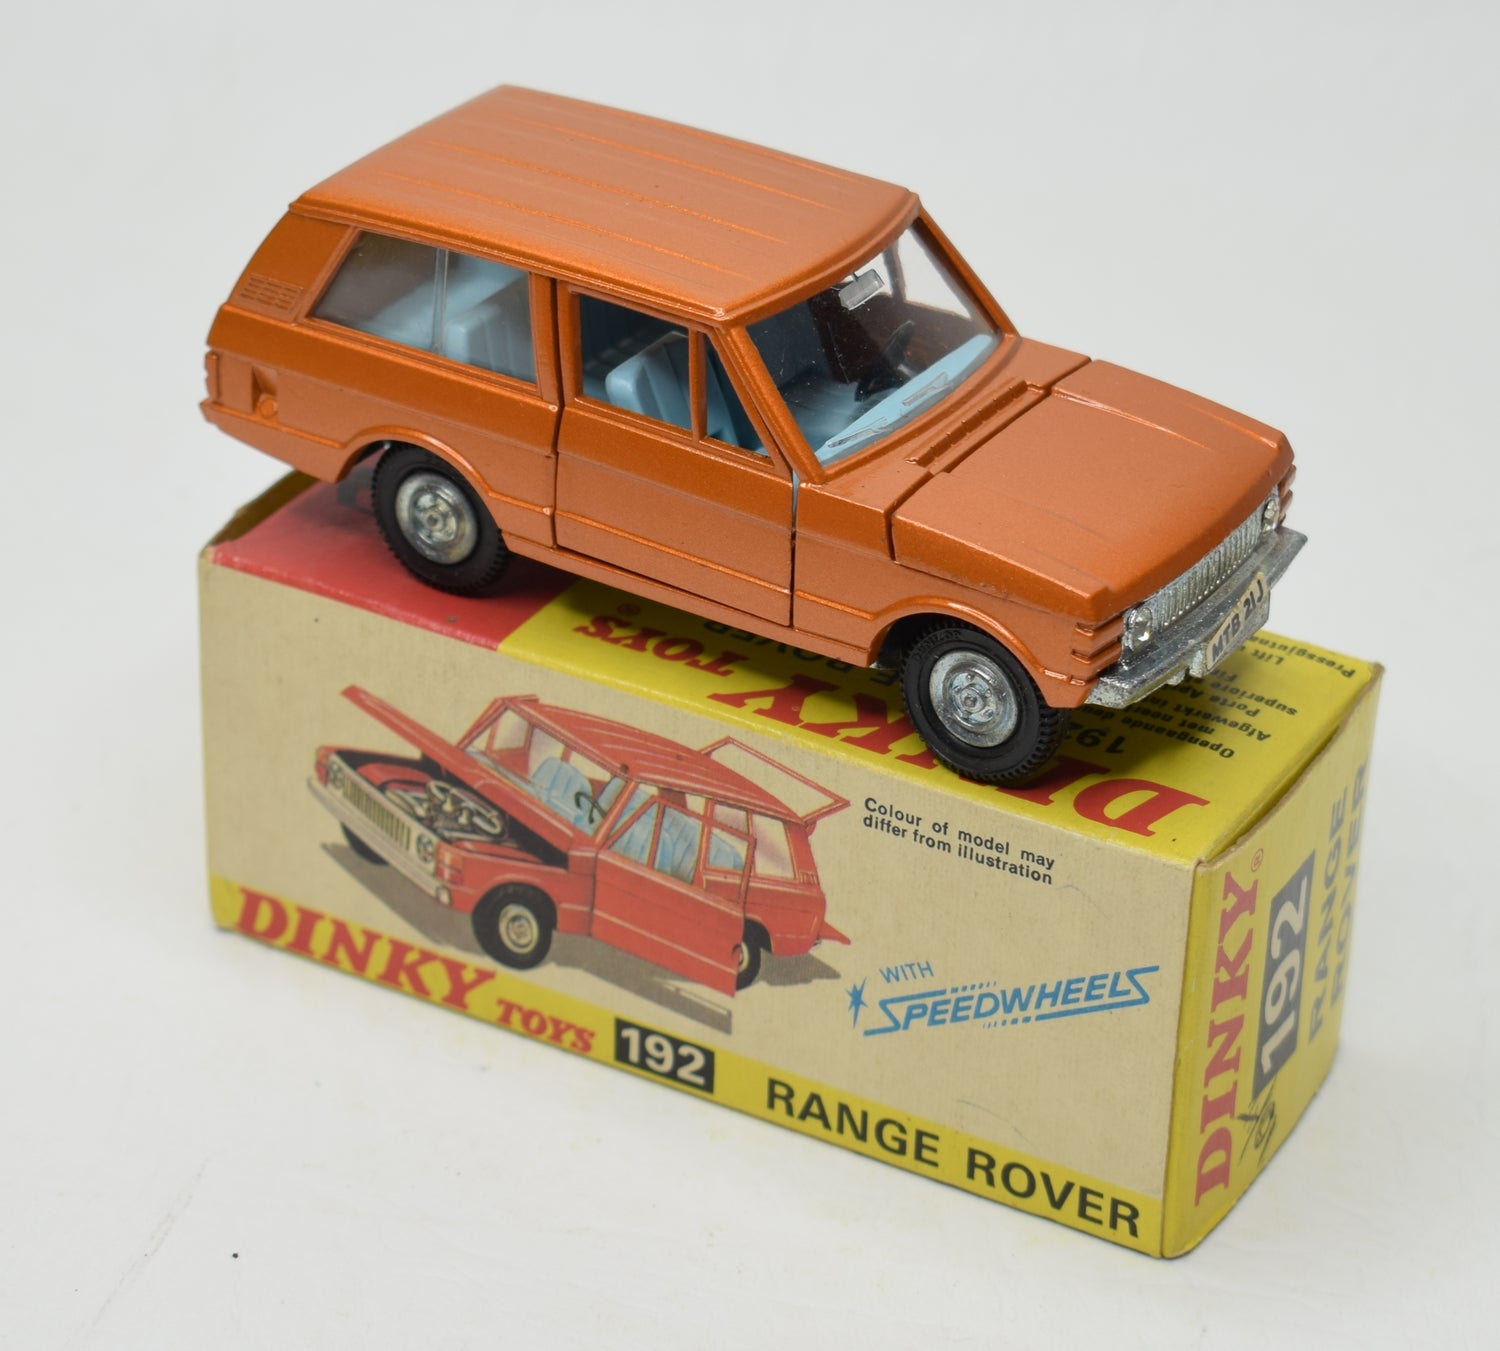 Dinky toys 192 Range Rover Very Near Mint/Boxed